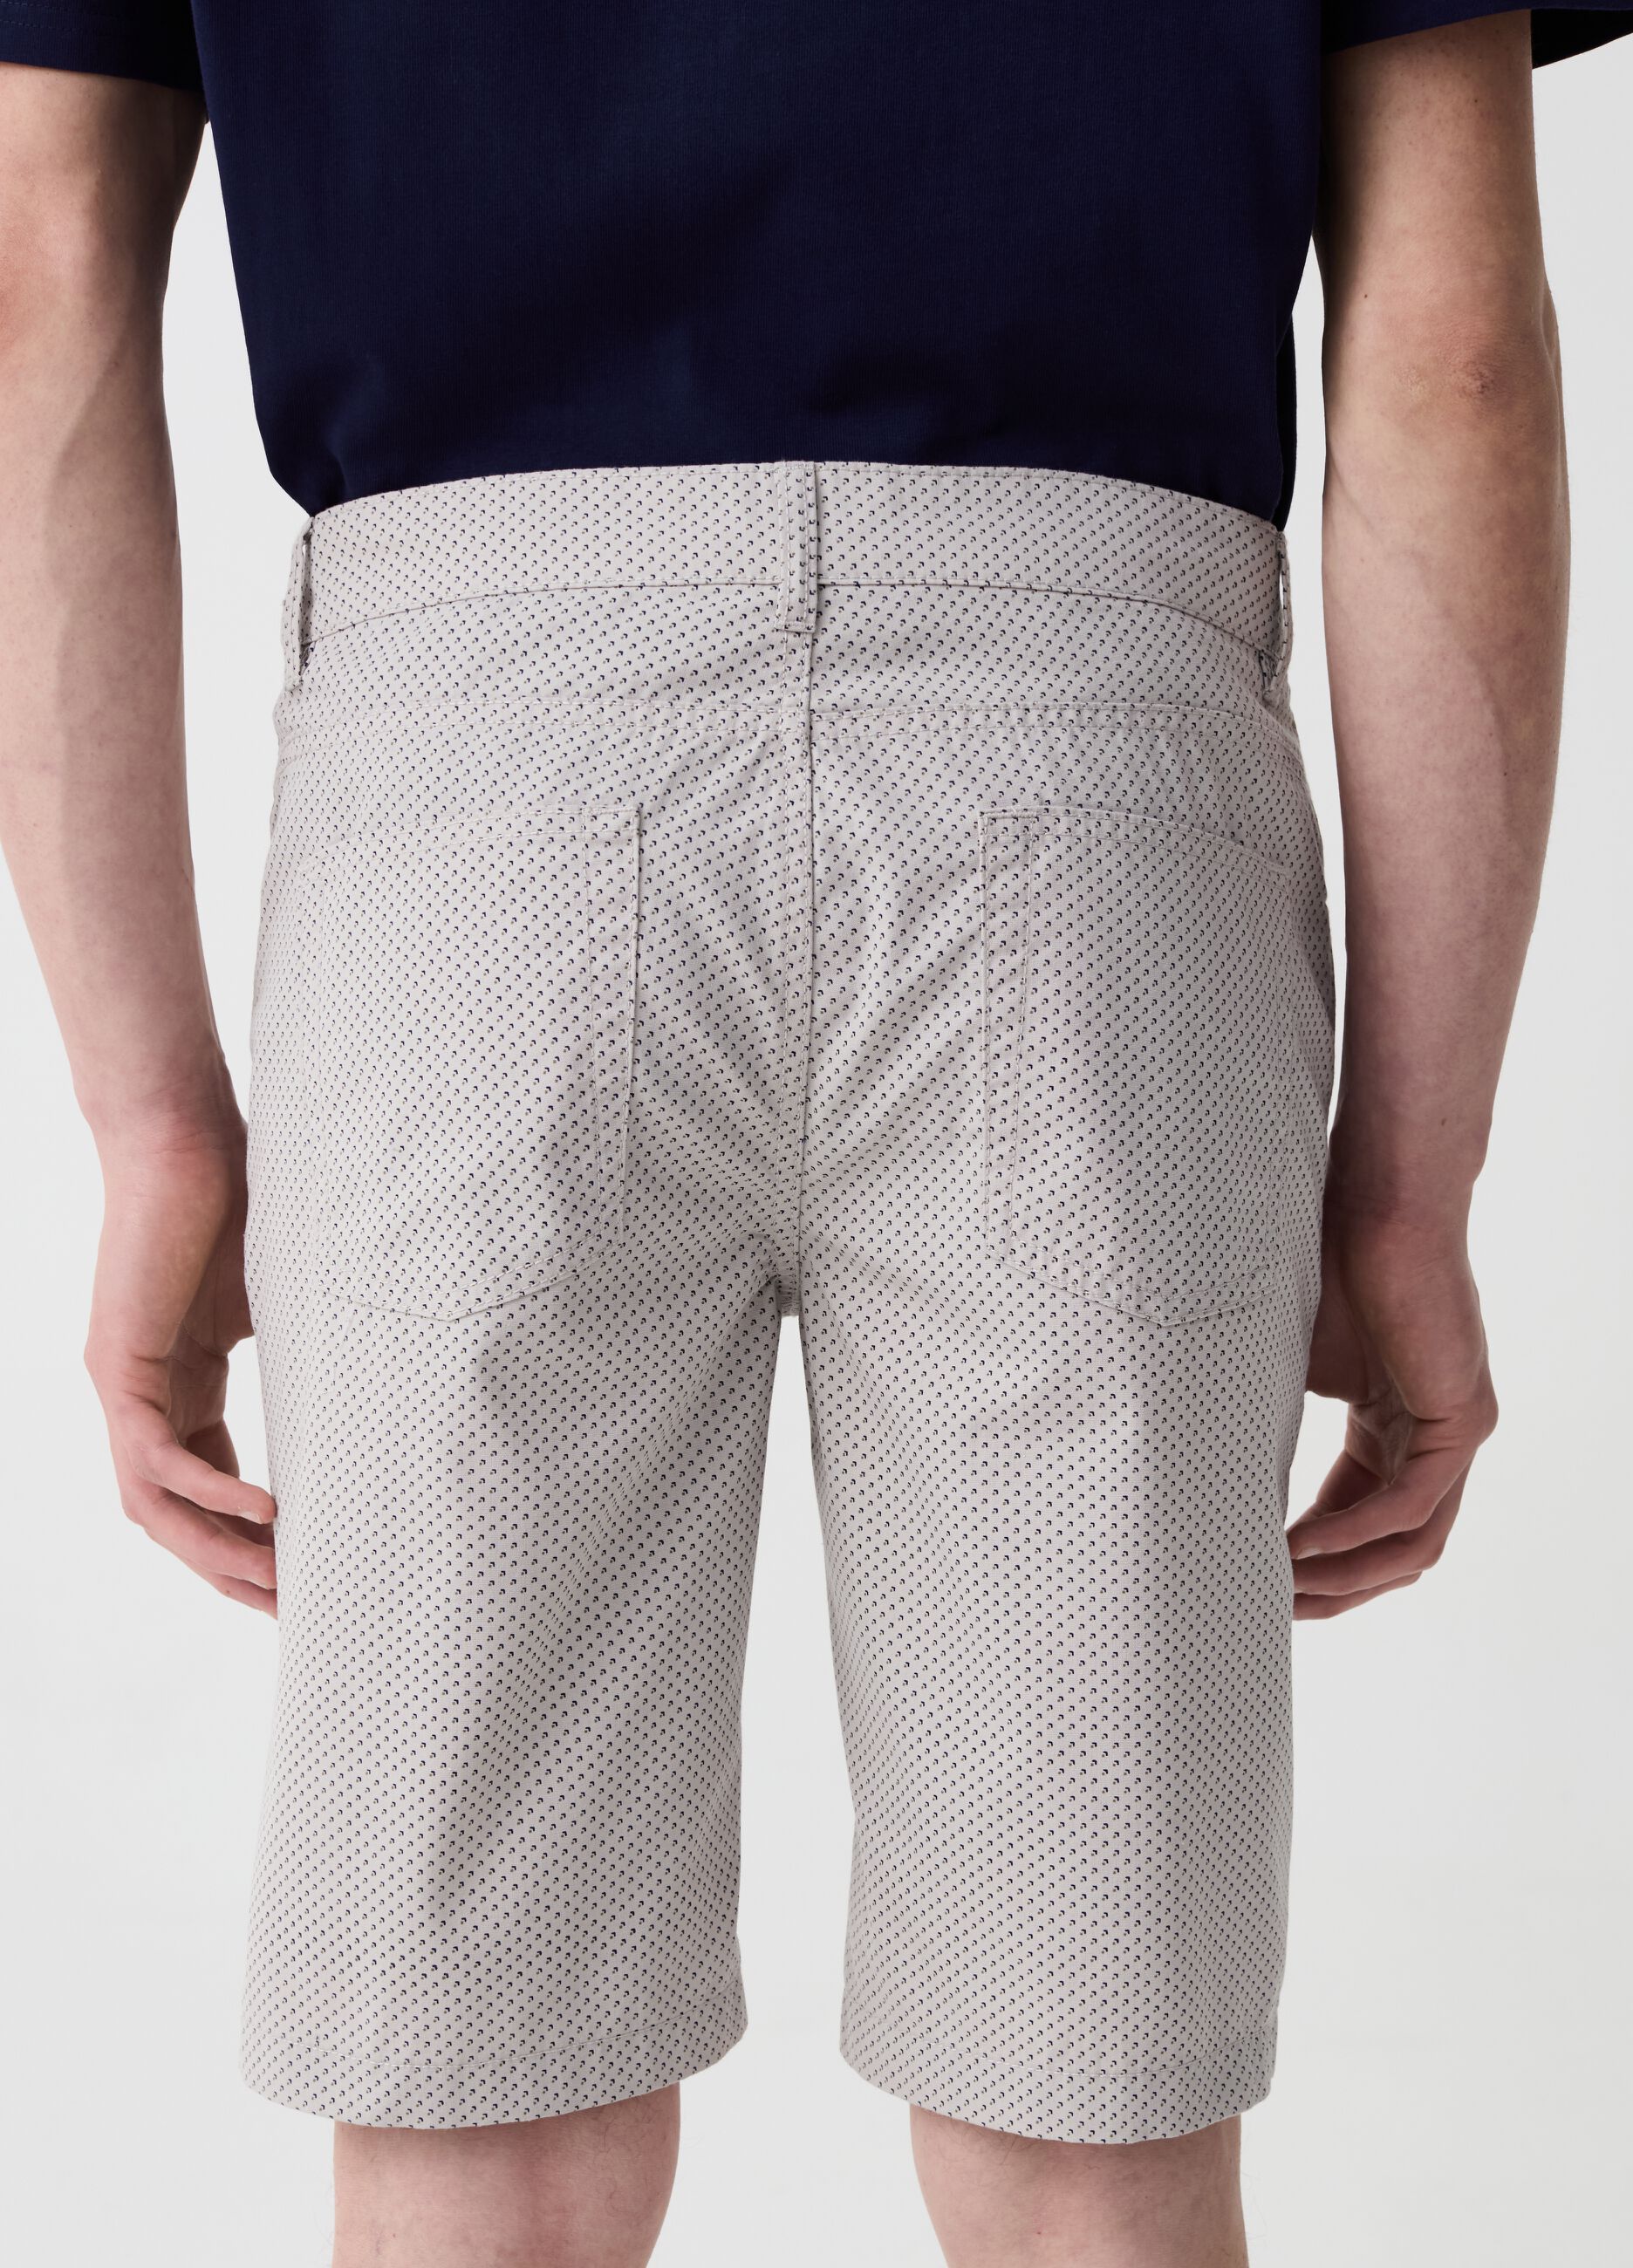 Bermuda shorts with micro pattern and five pockets